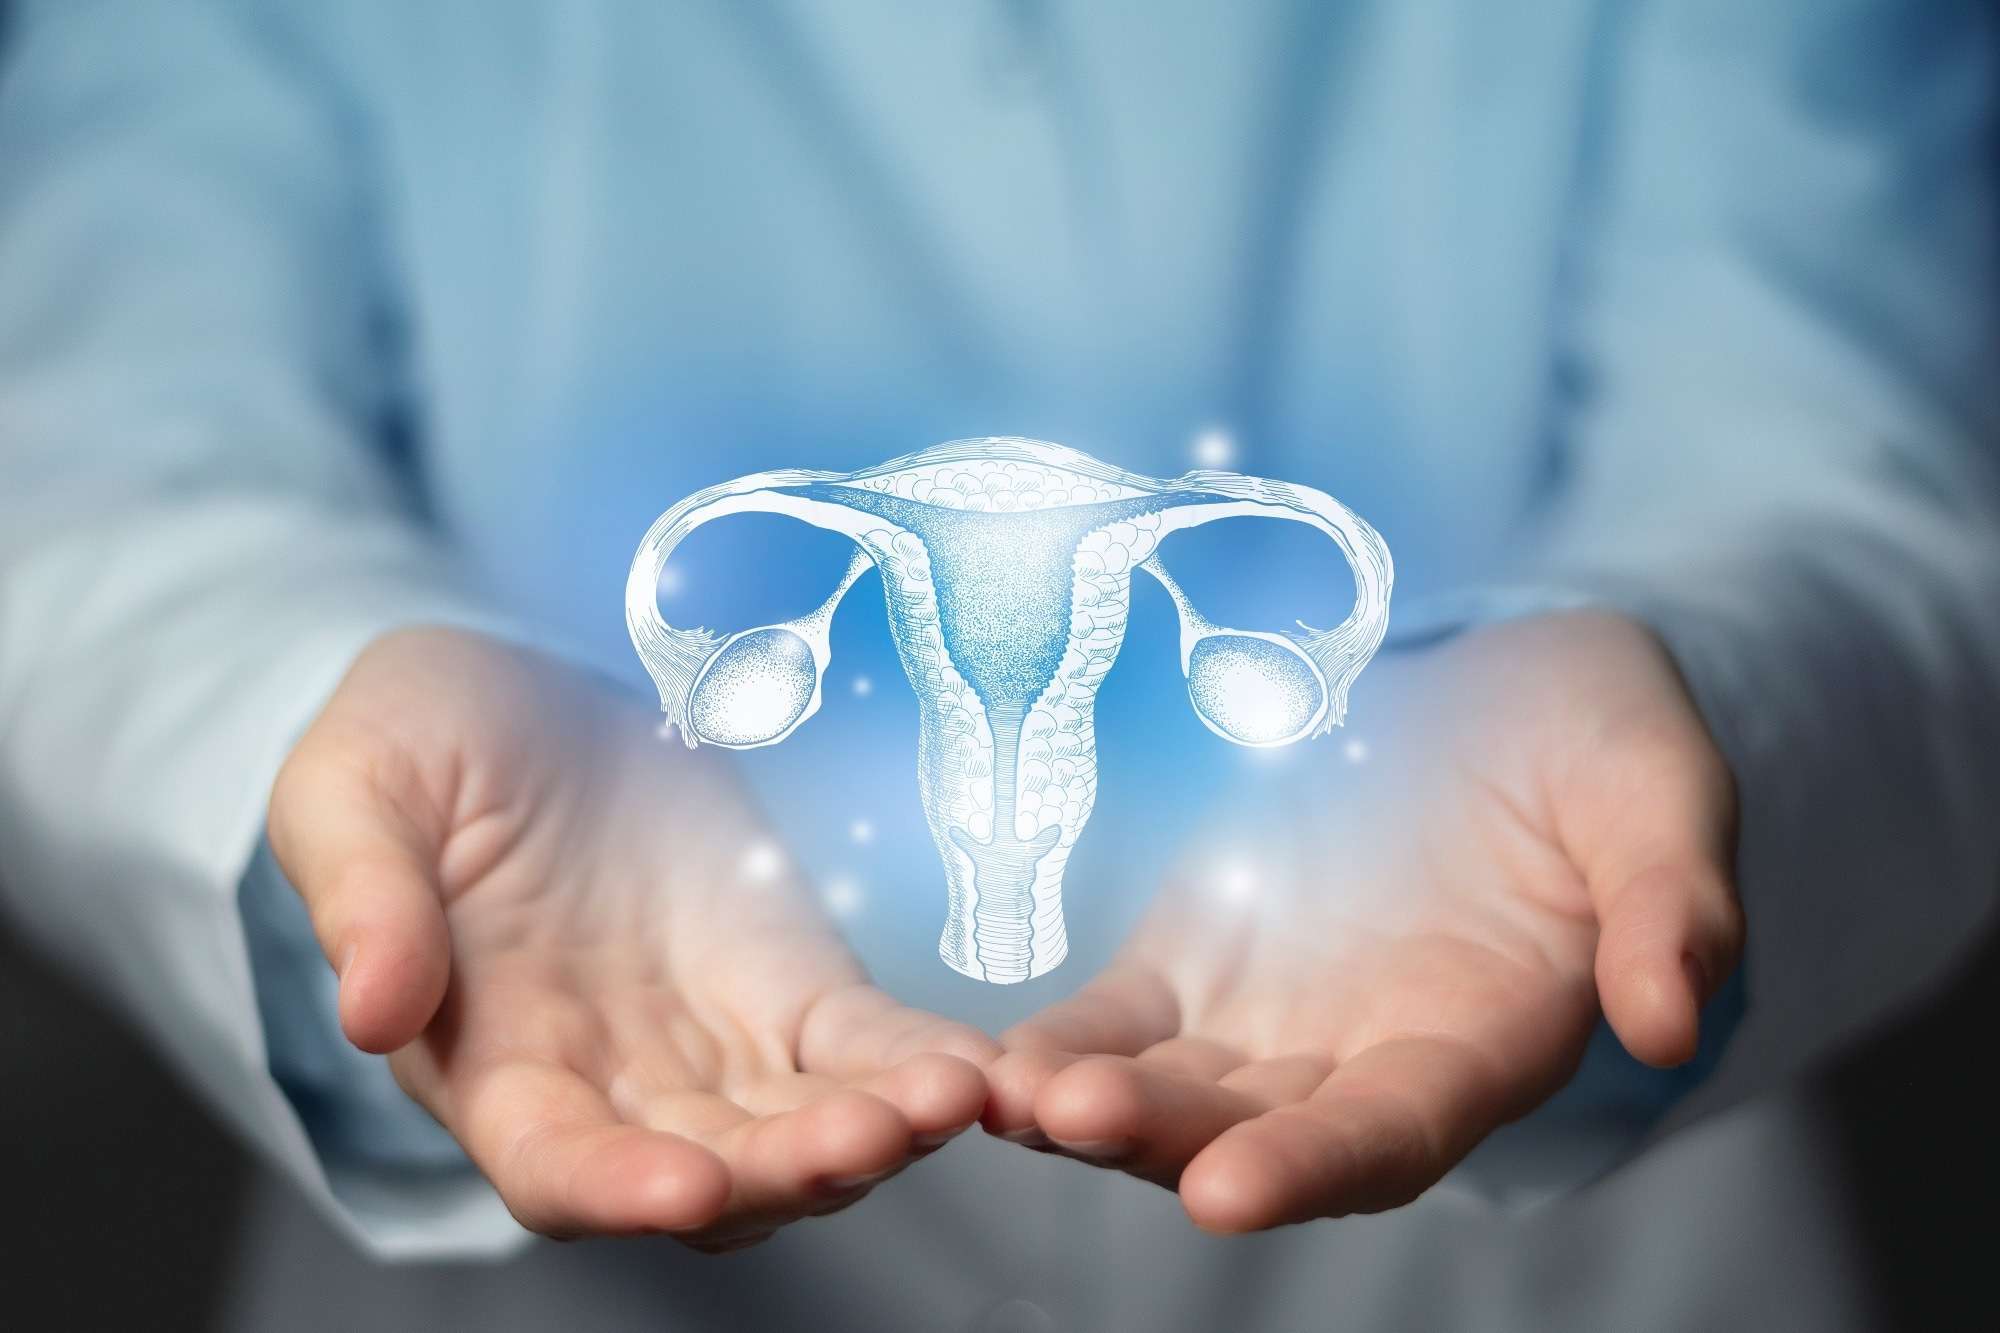 Study: The role of B cells in immune cell activation in polycystic ovary syndrome. Image Credit: mi_viri / Shutterstock.com